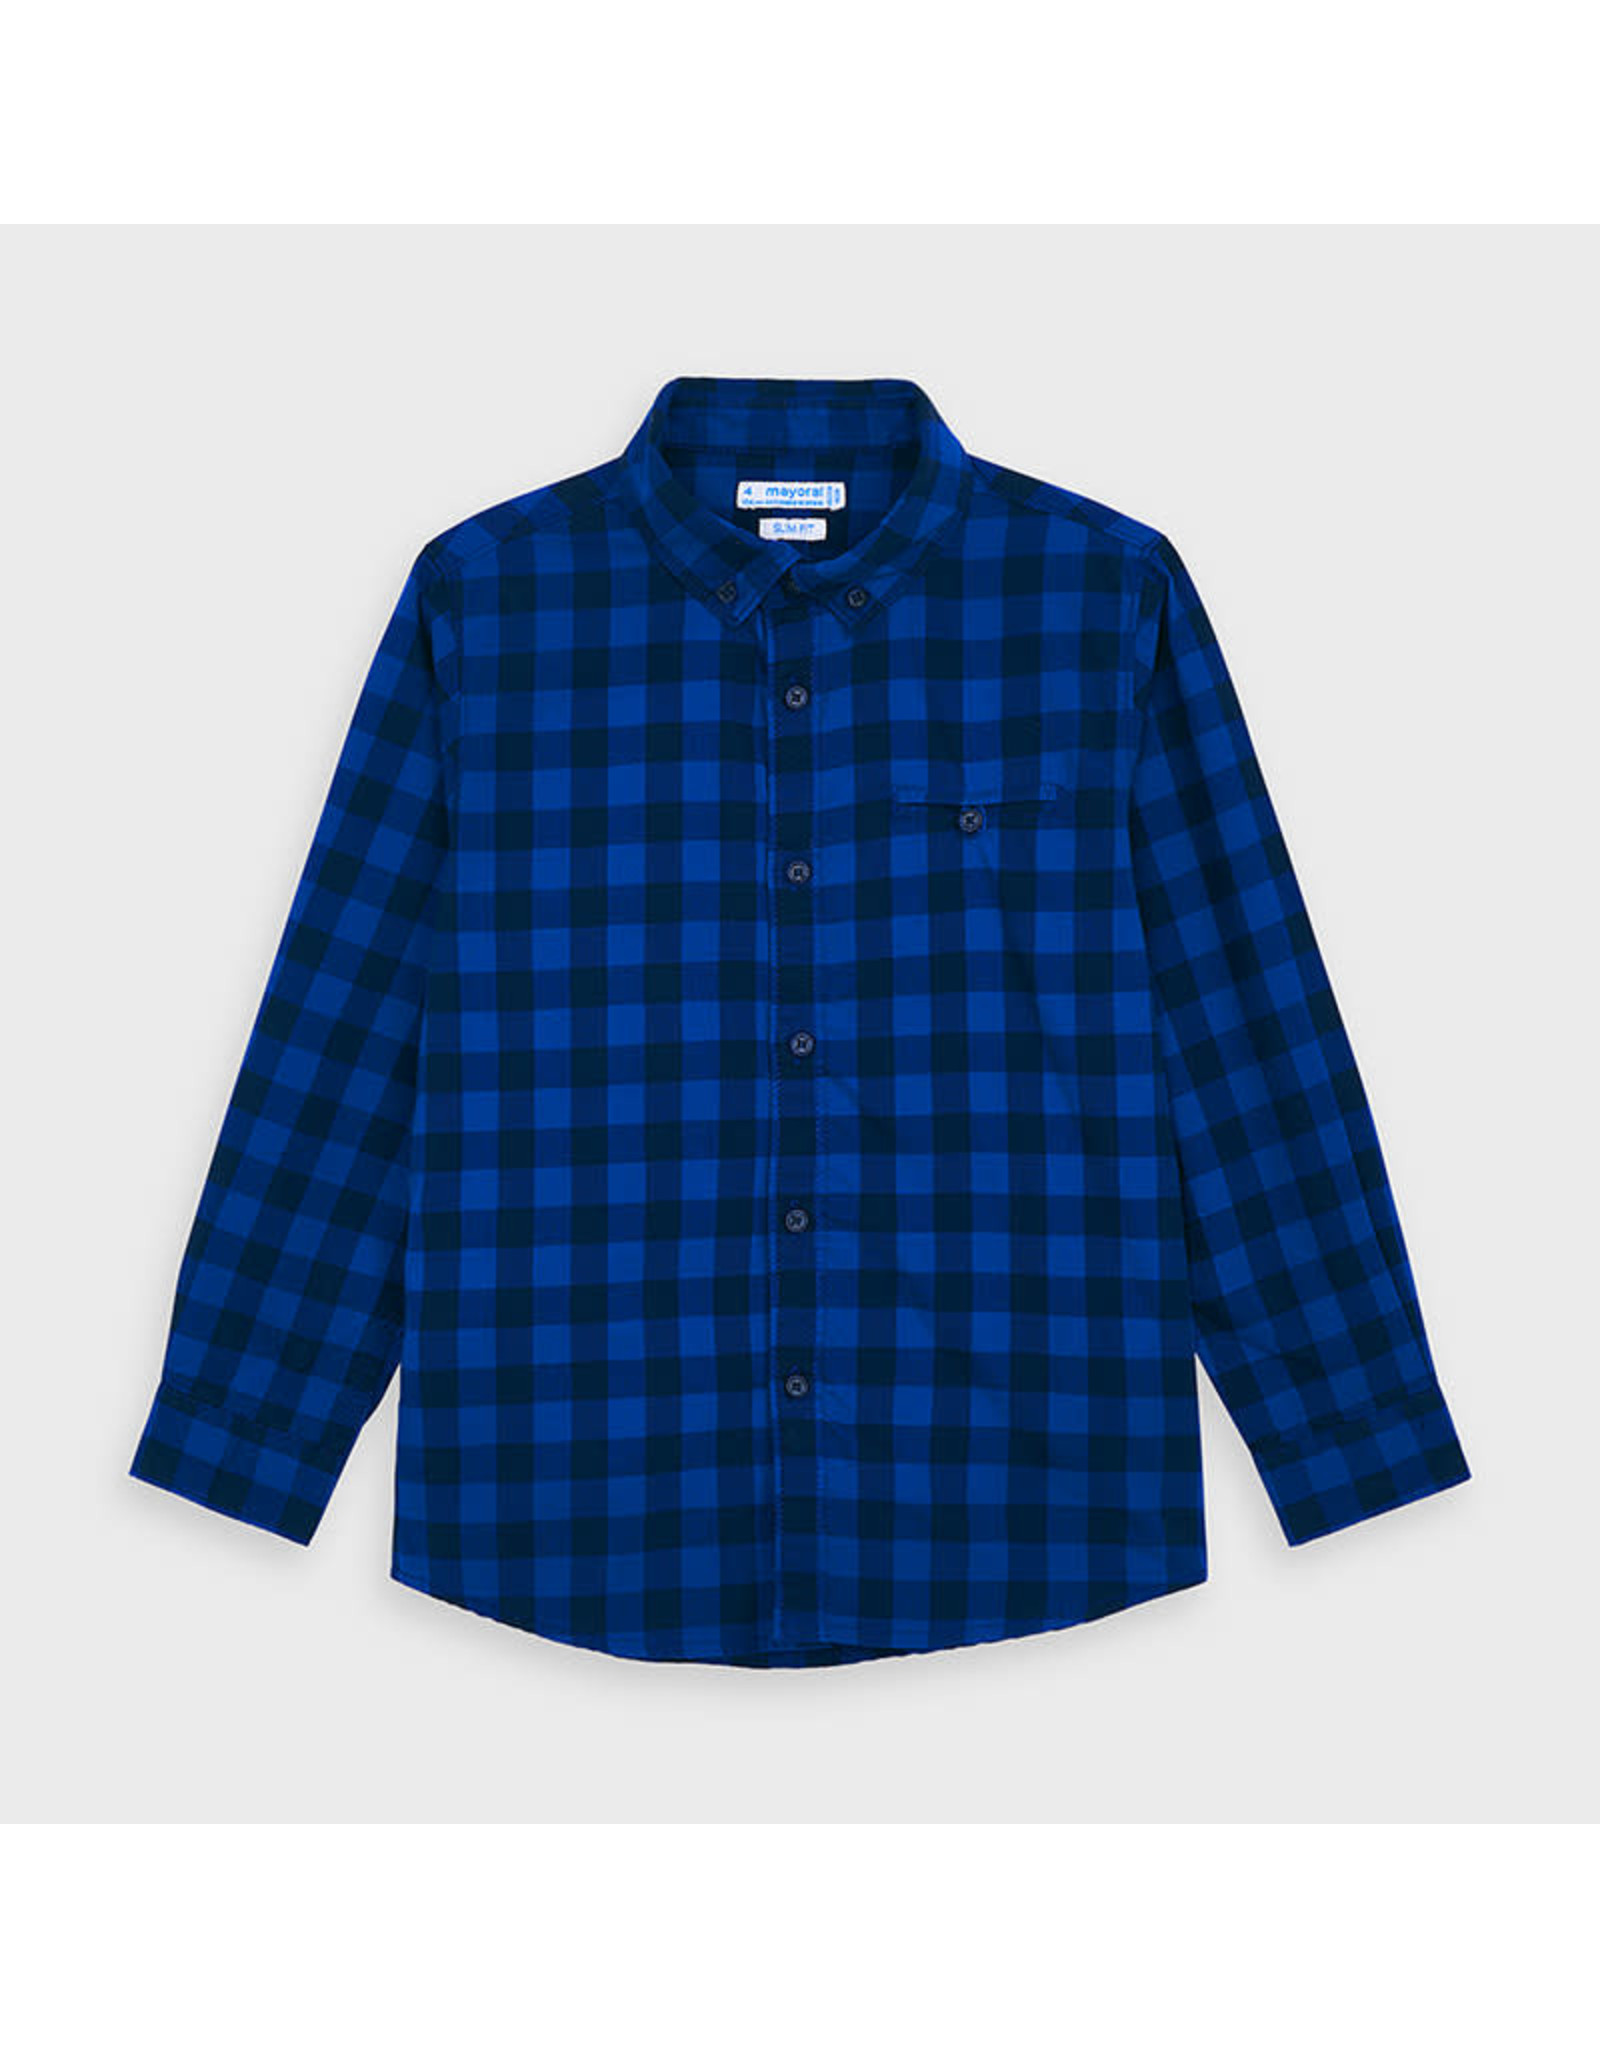 Mayoral Flannel Long Sleeve Button Up